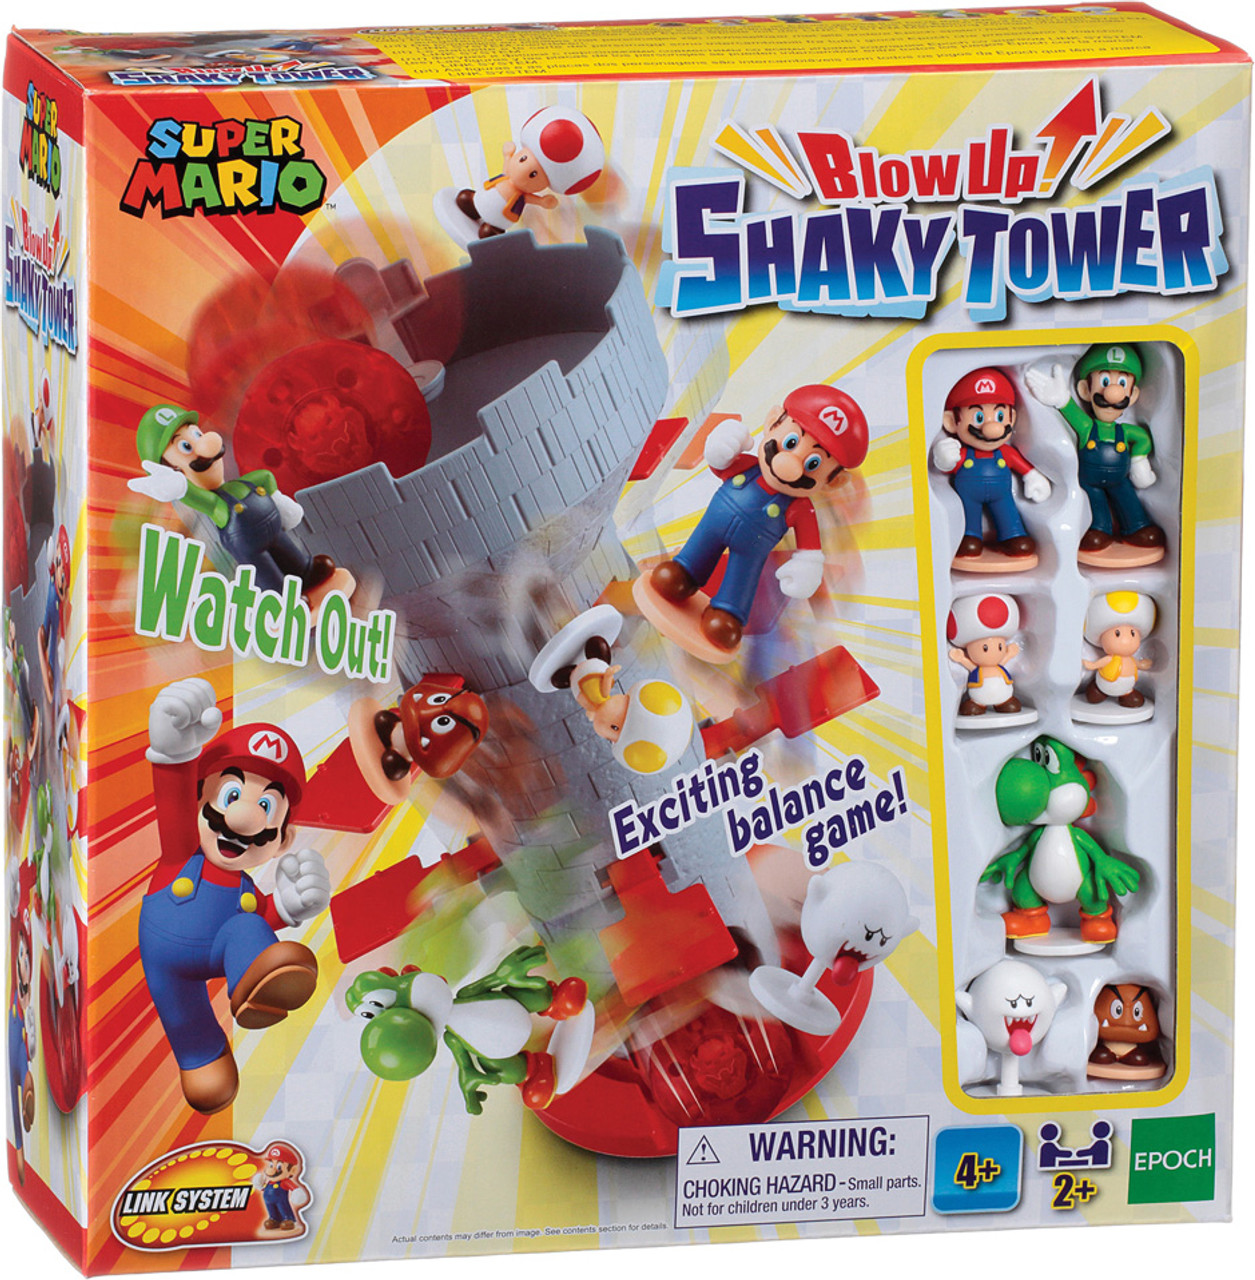 Super Mario Blow Up! Shaky Tower Game 1